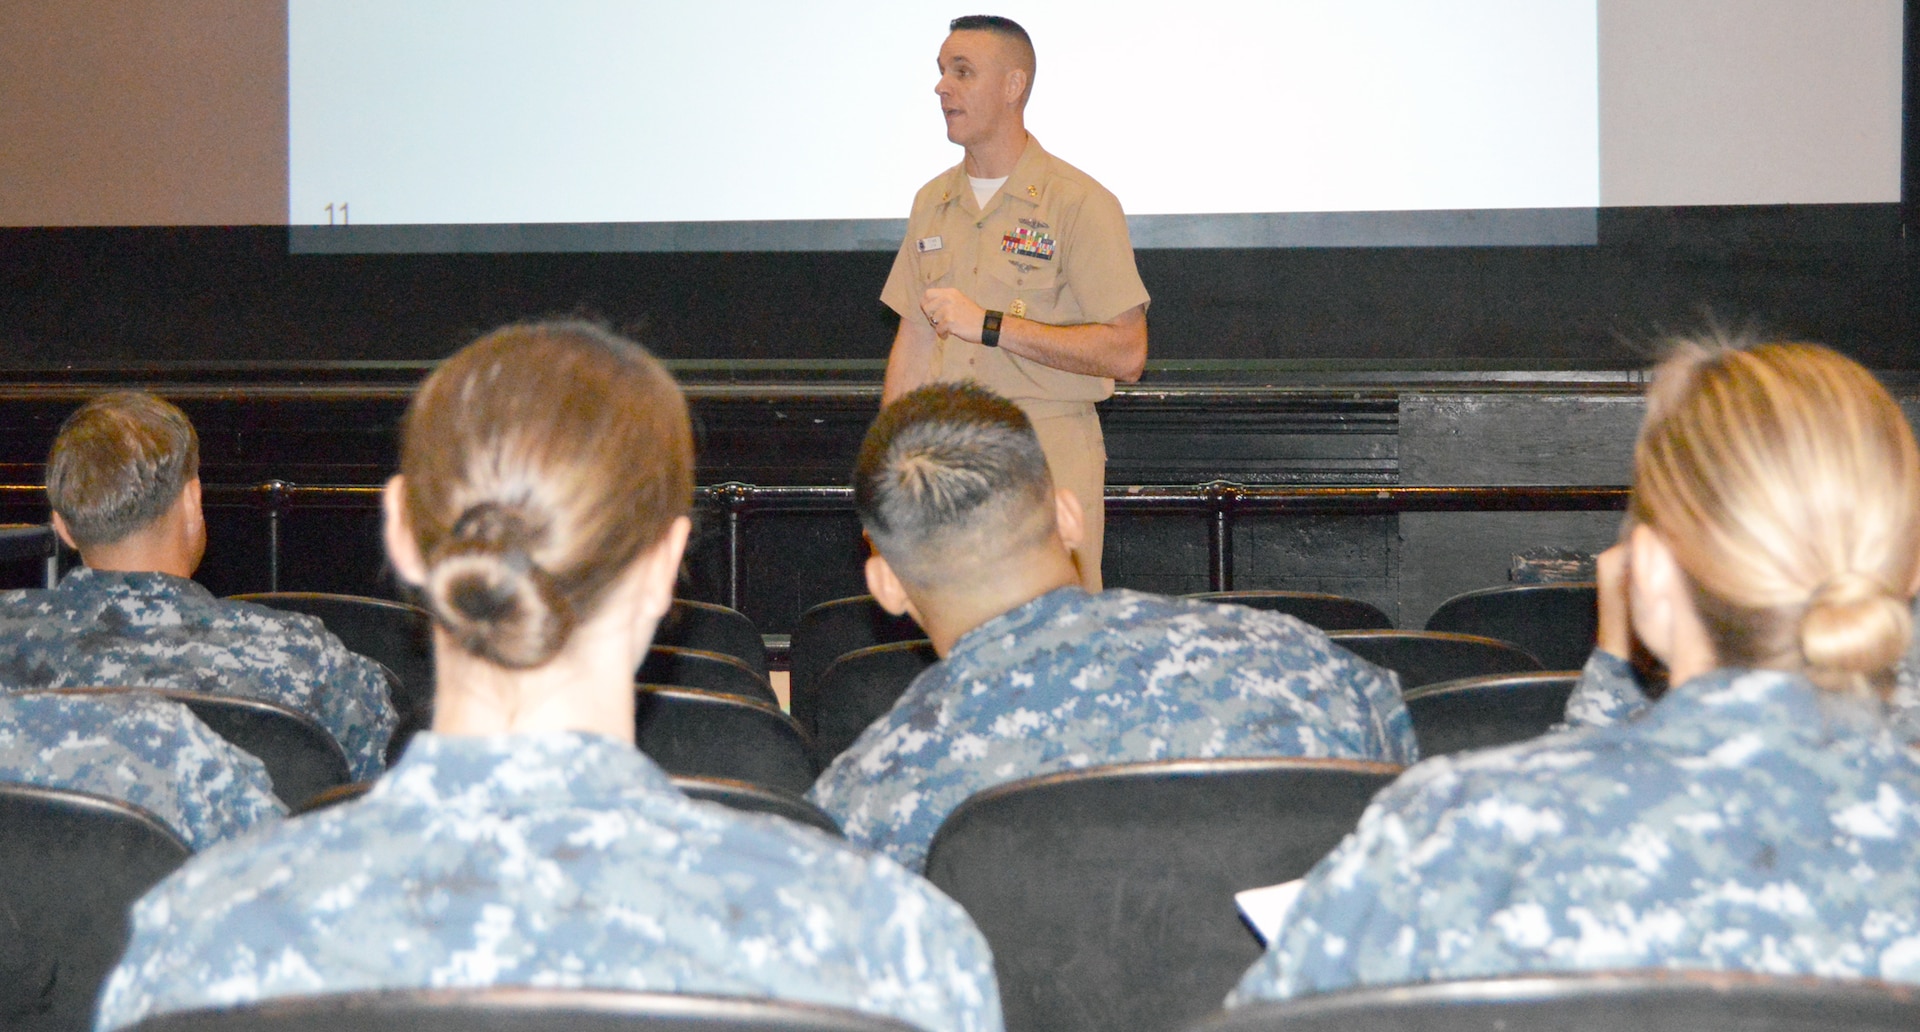 Command Master Chief Petty Officer Rich Curtis, director of the U.S. Navy Senior Enlisted Academy in Newport, R.I, speaks to San Antonio area chief petty officers at the Joint Base San Antonio-Randolph main auditorium as part of a 10-city, 24-day whirlwind tour of Navy fleet-concentration areas.  There are more than 10,000 active duty, reserve and student Navy Sailors, civilian employees and family members in the San Antonio area.